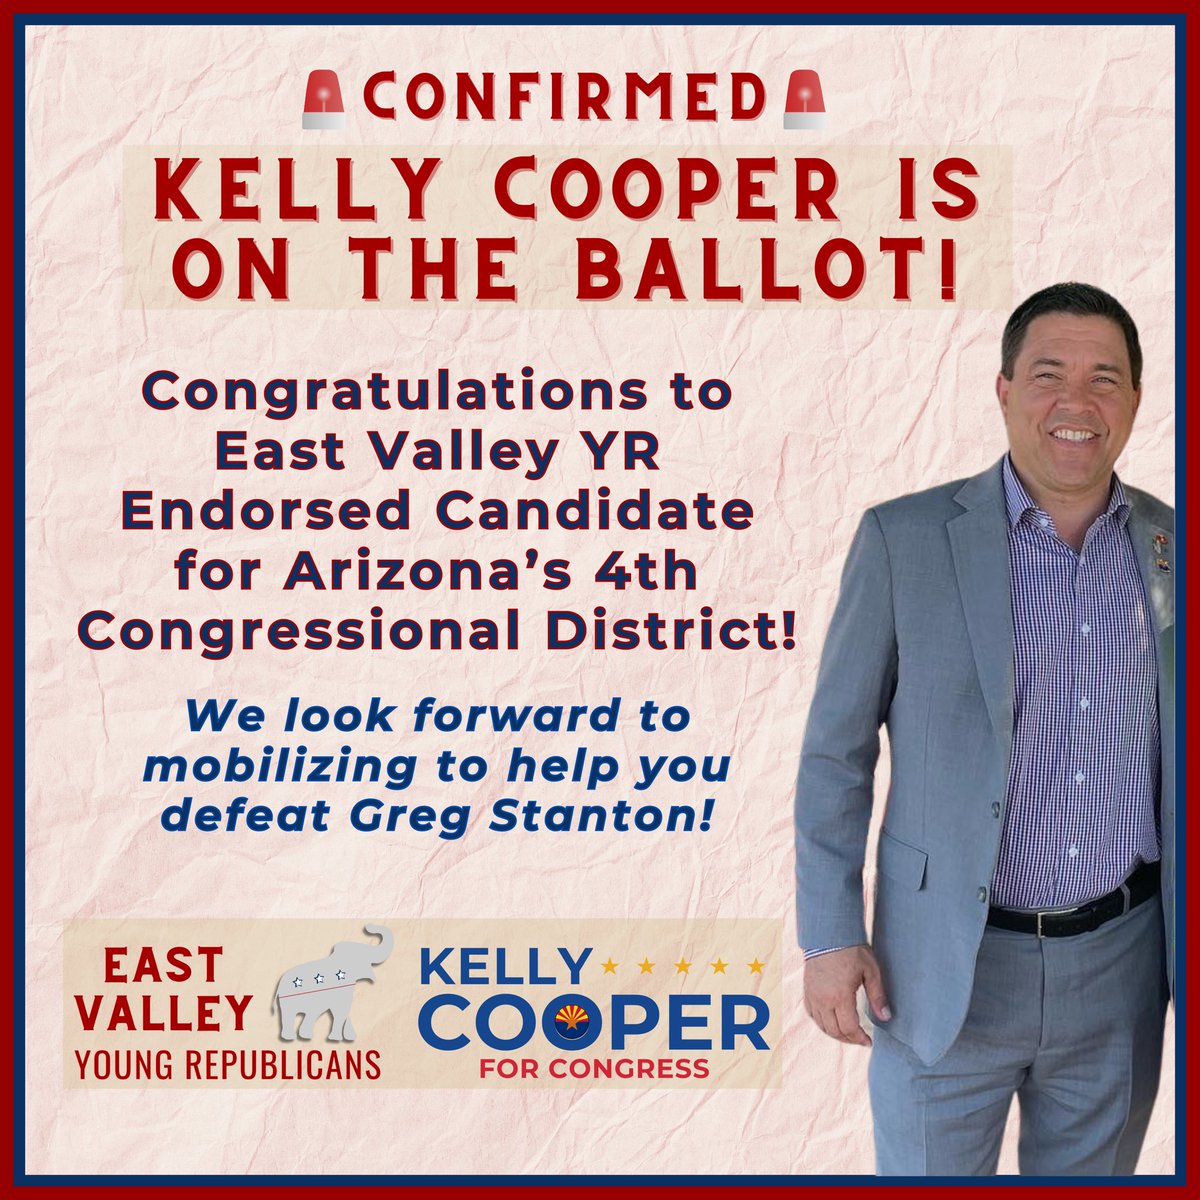 Congrats to future Congressman Cooper on making the ballot! EVYR members spent the last several months gathering signatures for @KellyCooperAZ and are proud to support this campaign for AZ-04!